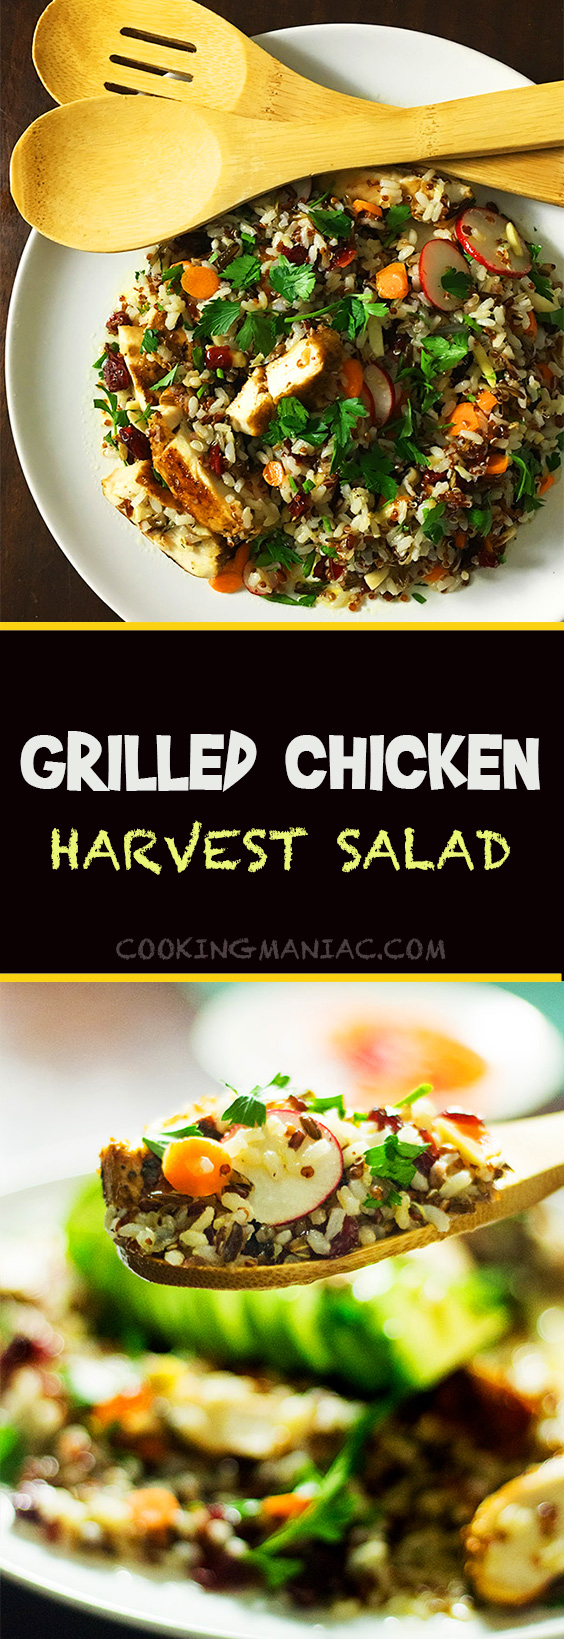 Grilled-Chicken-Harvest-Salad-Long-Pin